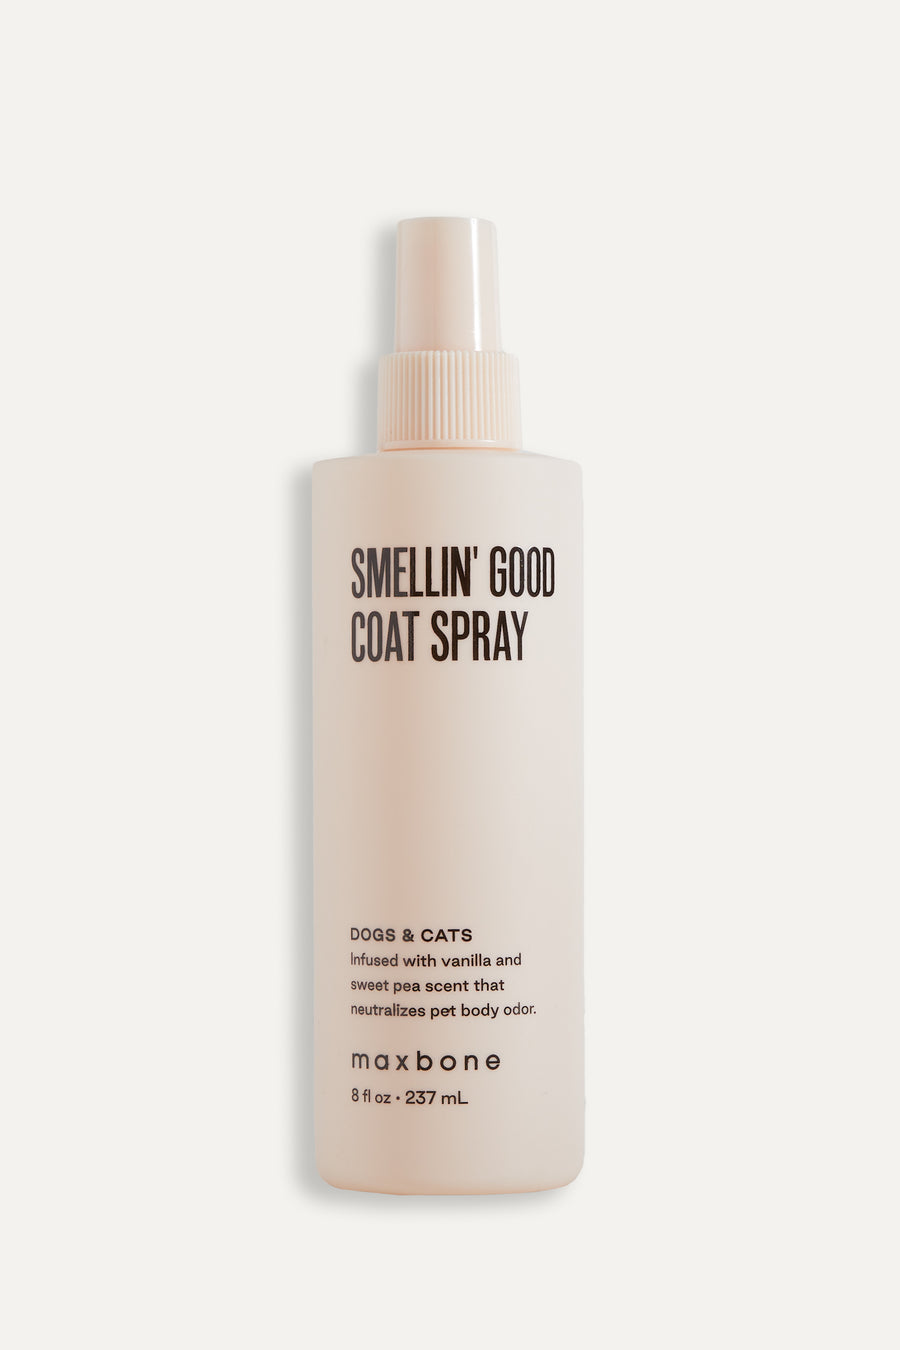 MAXBONE Smellin’ Good Spray for Dogs & Cats